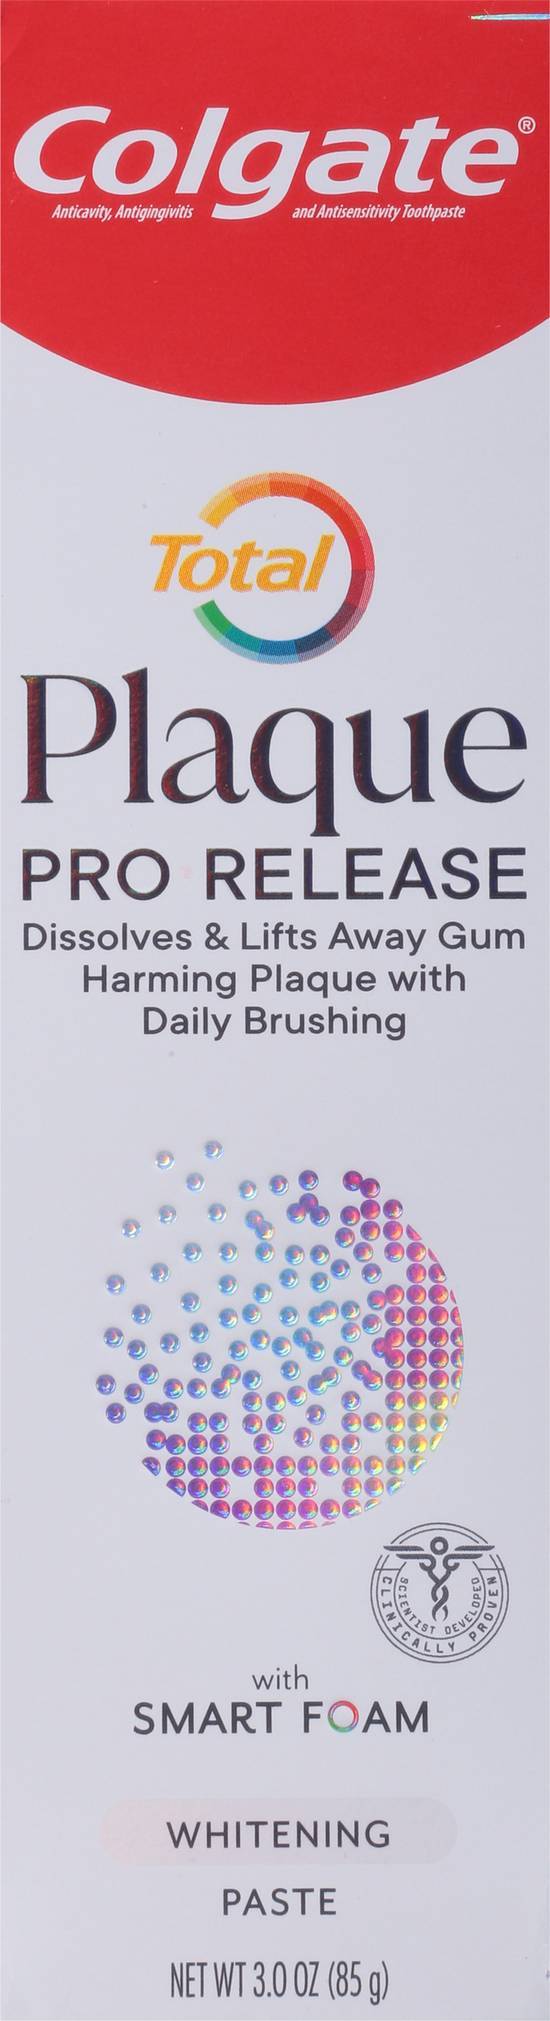 Colgate Total Whitening Pro Release Plaque Toothpaste